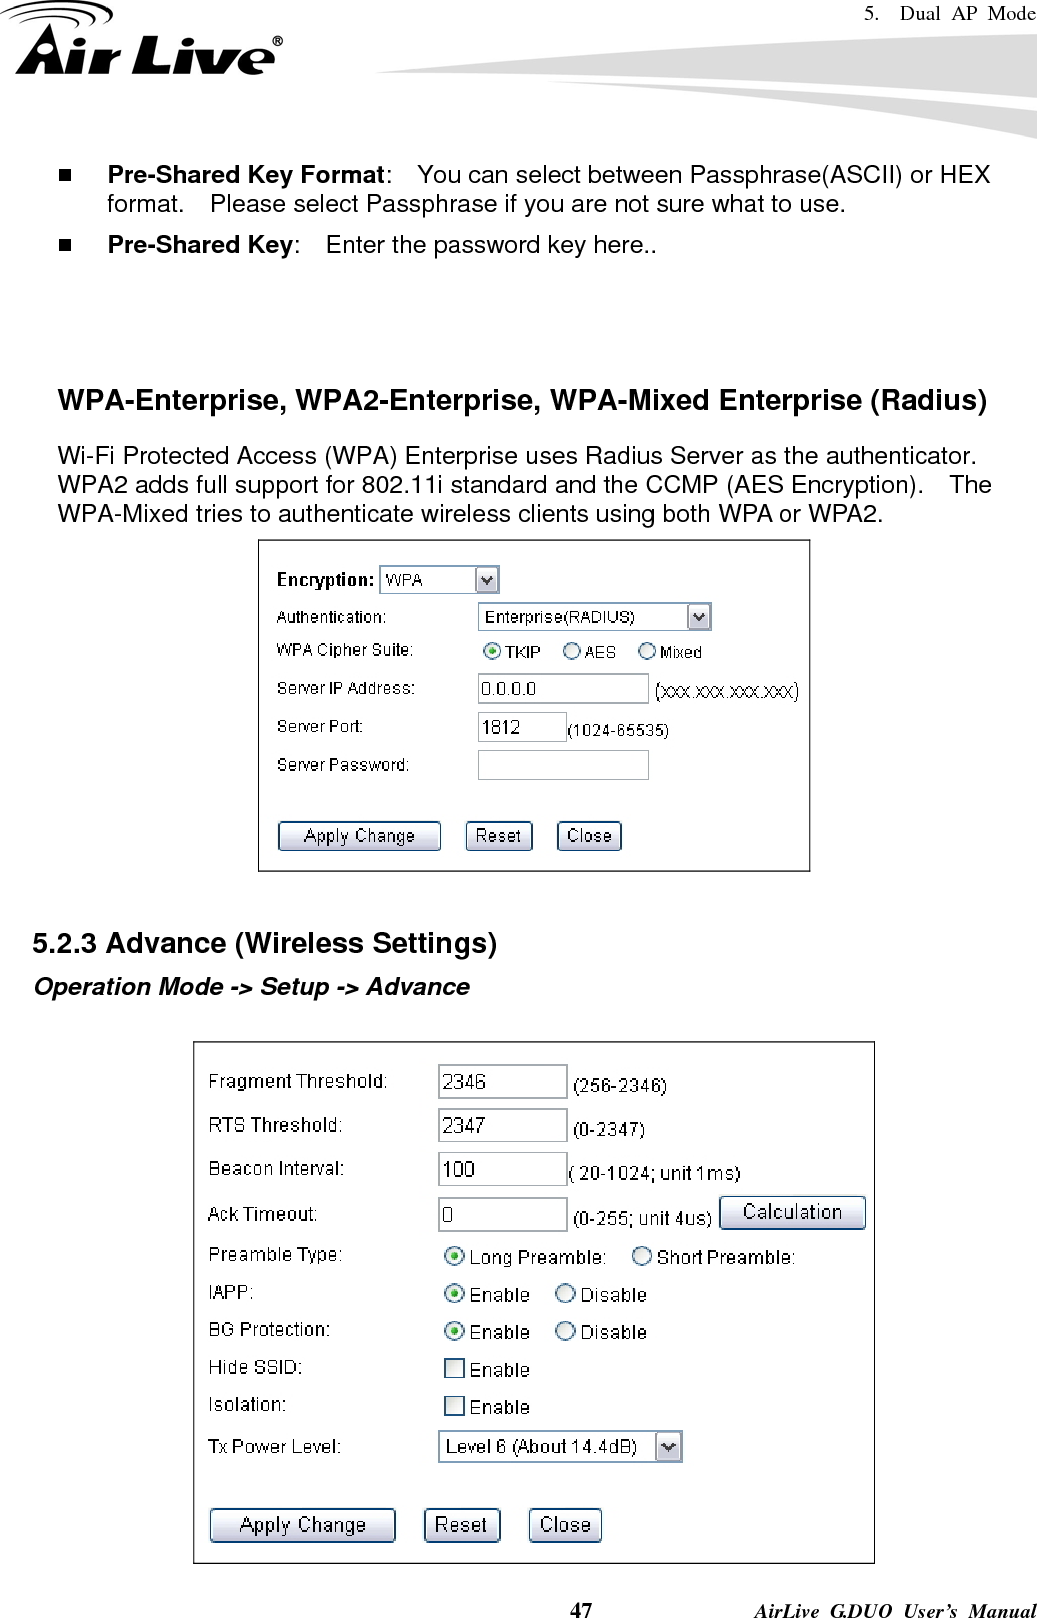 5.  Dual AP Mode    47              AirLive G.DUO User’s Manual  Pre-Shared Key Format:    You can select between Passphrase(ASCII) or HEX format.    Please select Passphrase if you are not sure what to use.  Pre-Shared Key:    Enter the password key here..    WPA-Enterprise, WPA2-Enterprise, WPA-Mixed Enterprise (Radius) Wi-Fi Protected Access (WPA) Enterprise uses Radius Server as the authenticator.   WPA2 adds full support for 802.11i standard and the CCMP (AES Encryption).    The WPA-Mixed tries to authenticate wireless clients using both WPA or WPA2.       5.2.3 Advance (Wireless Settings) Operation Mode -&gt; Setup -&gt; Advance   